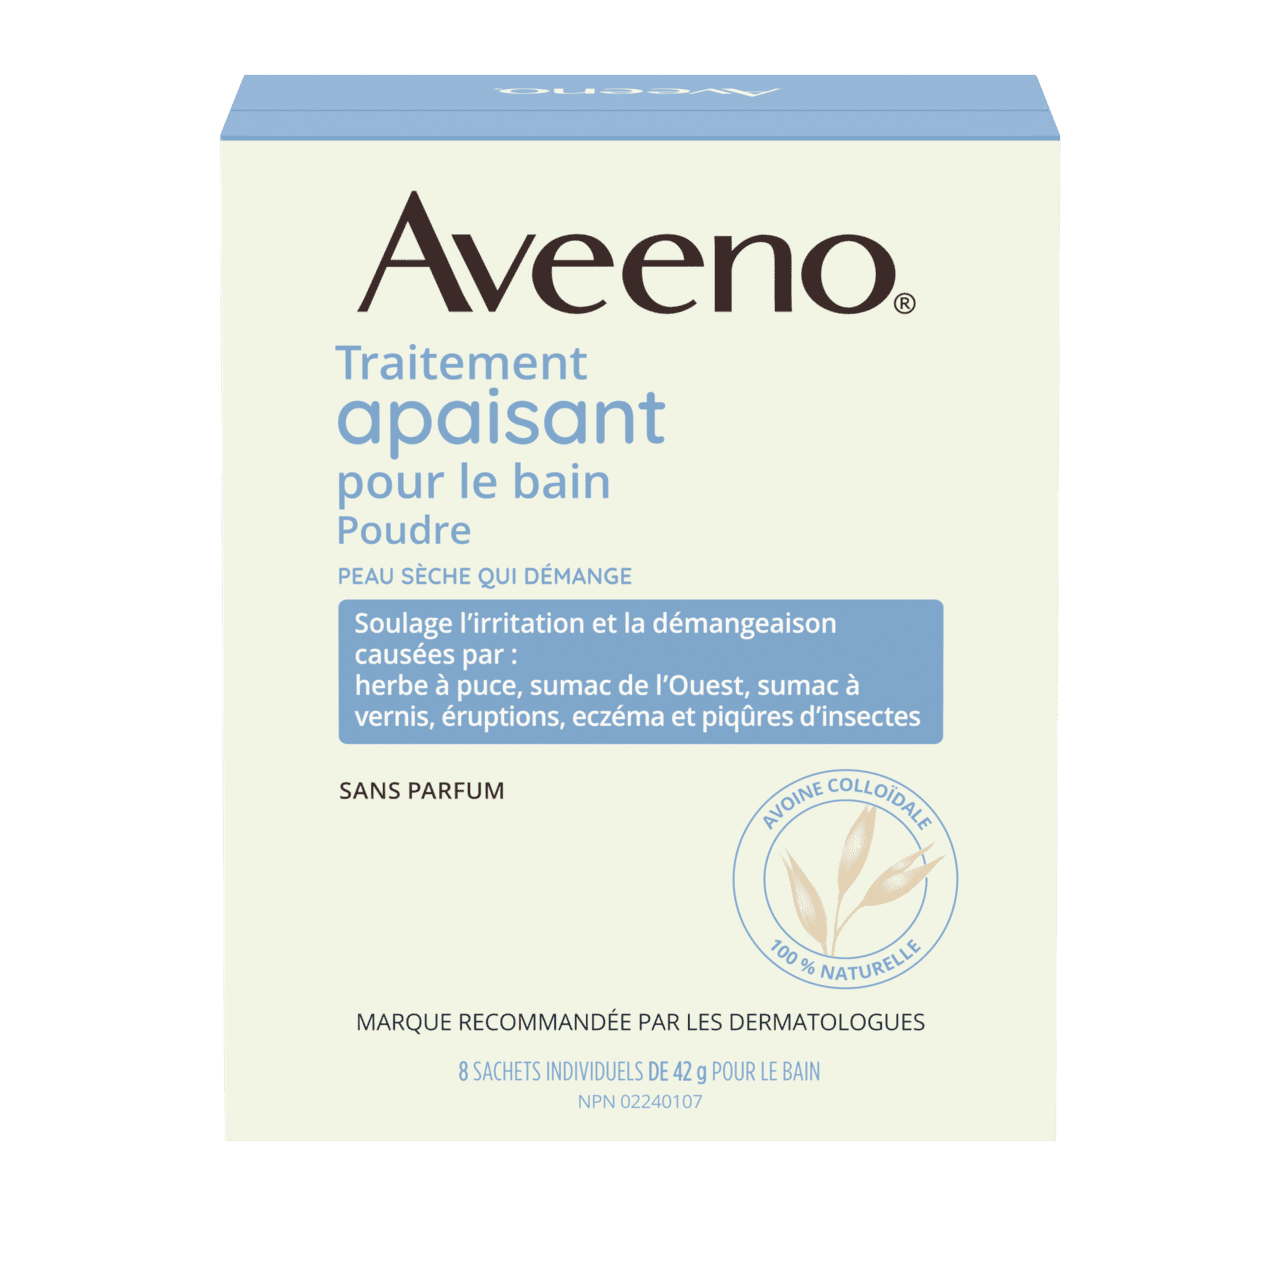 French side of packaging for AVEENO® Soothing Bath Treatment